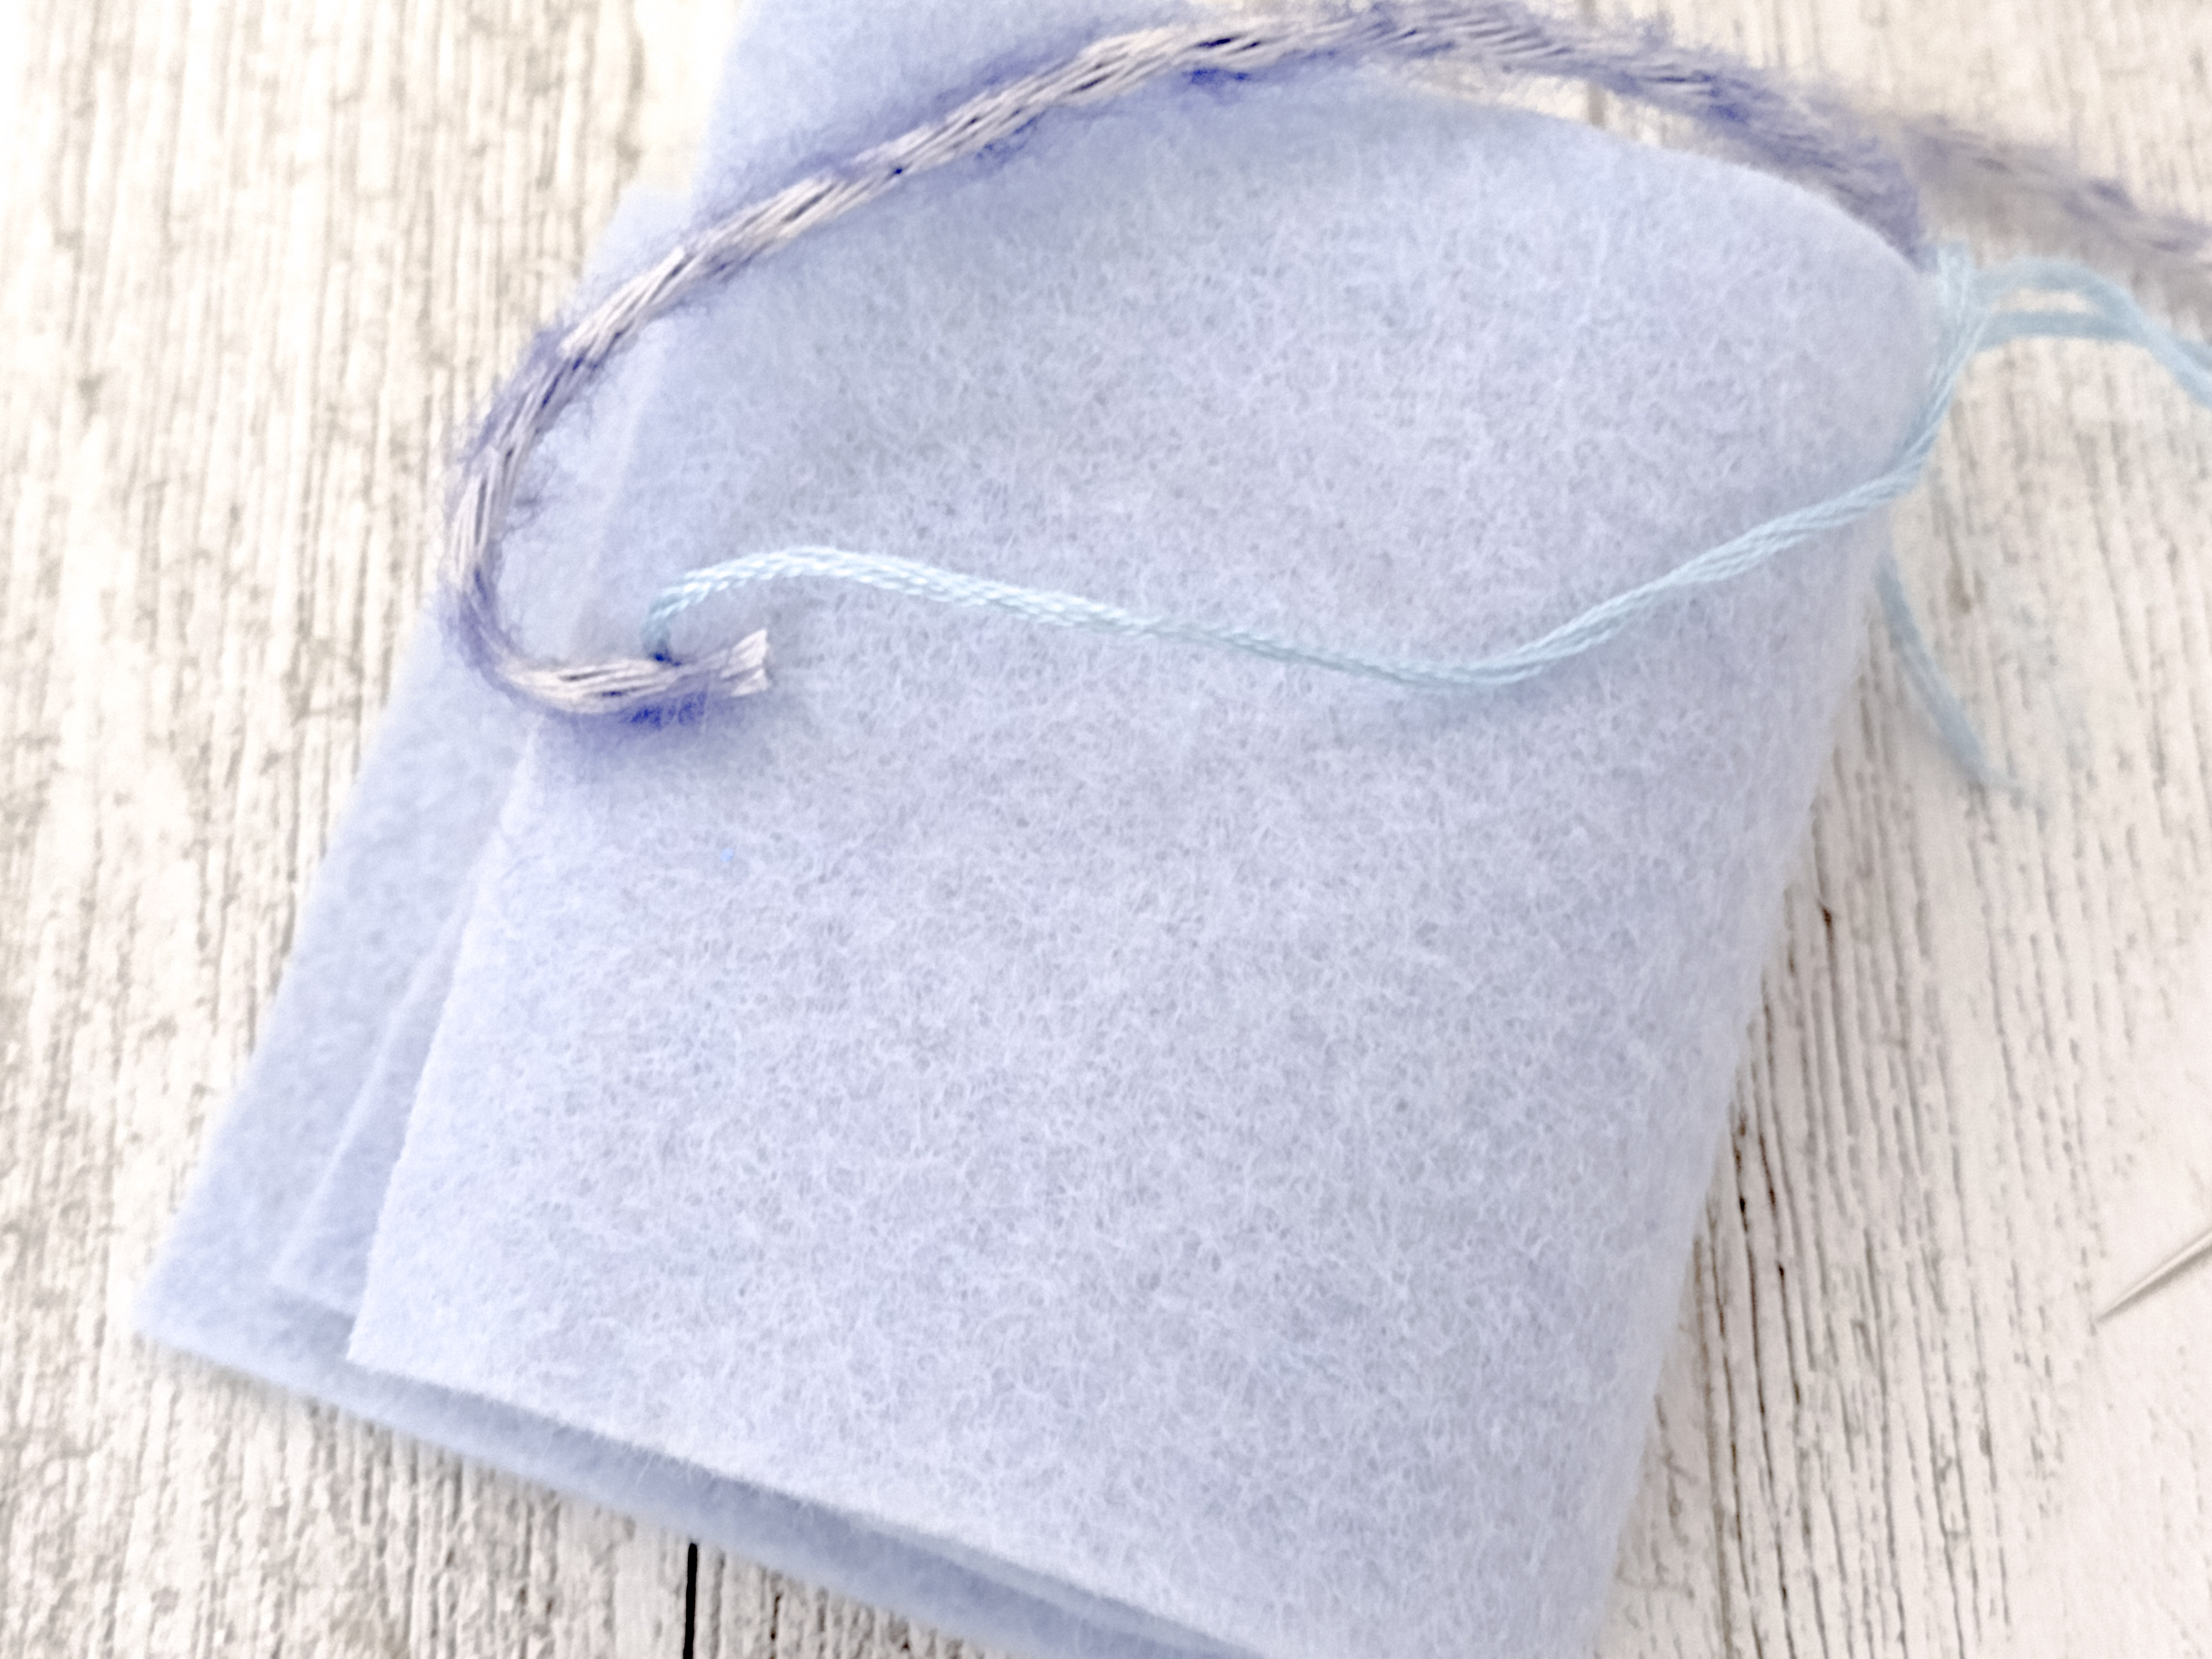 Sew on the yarn to the simple needle book